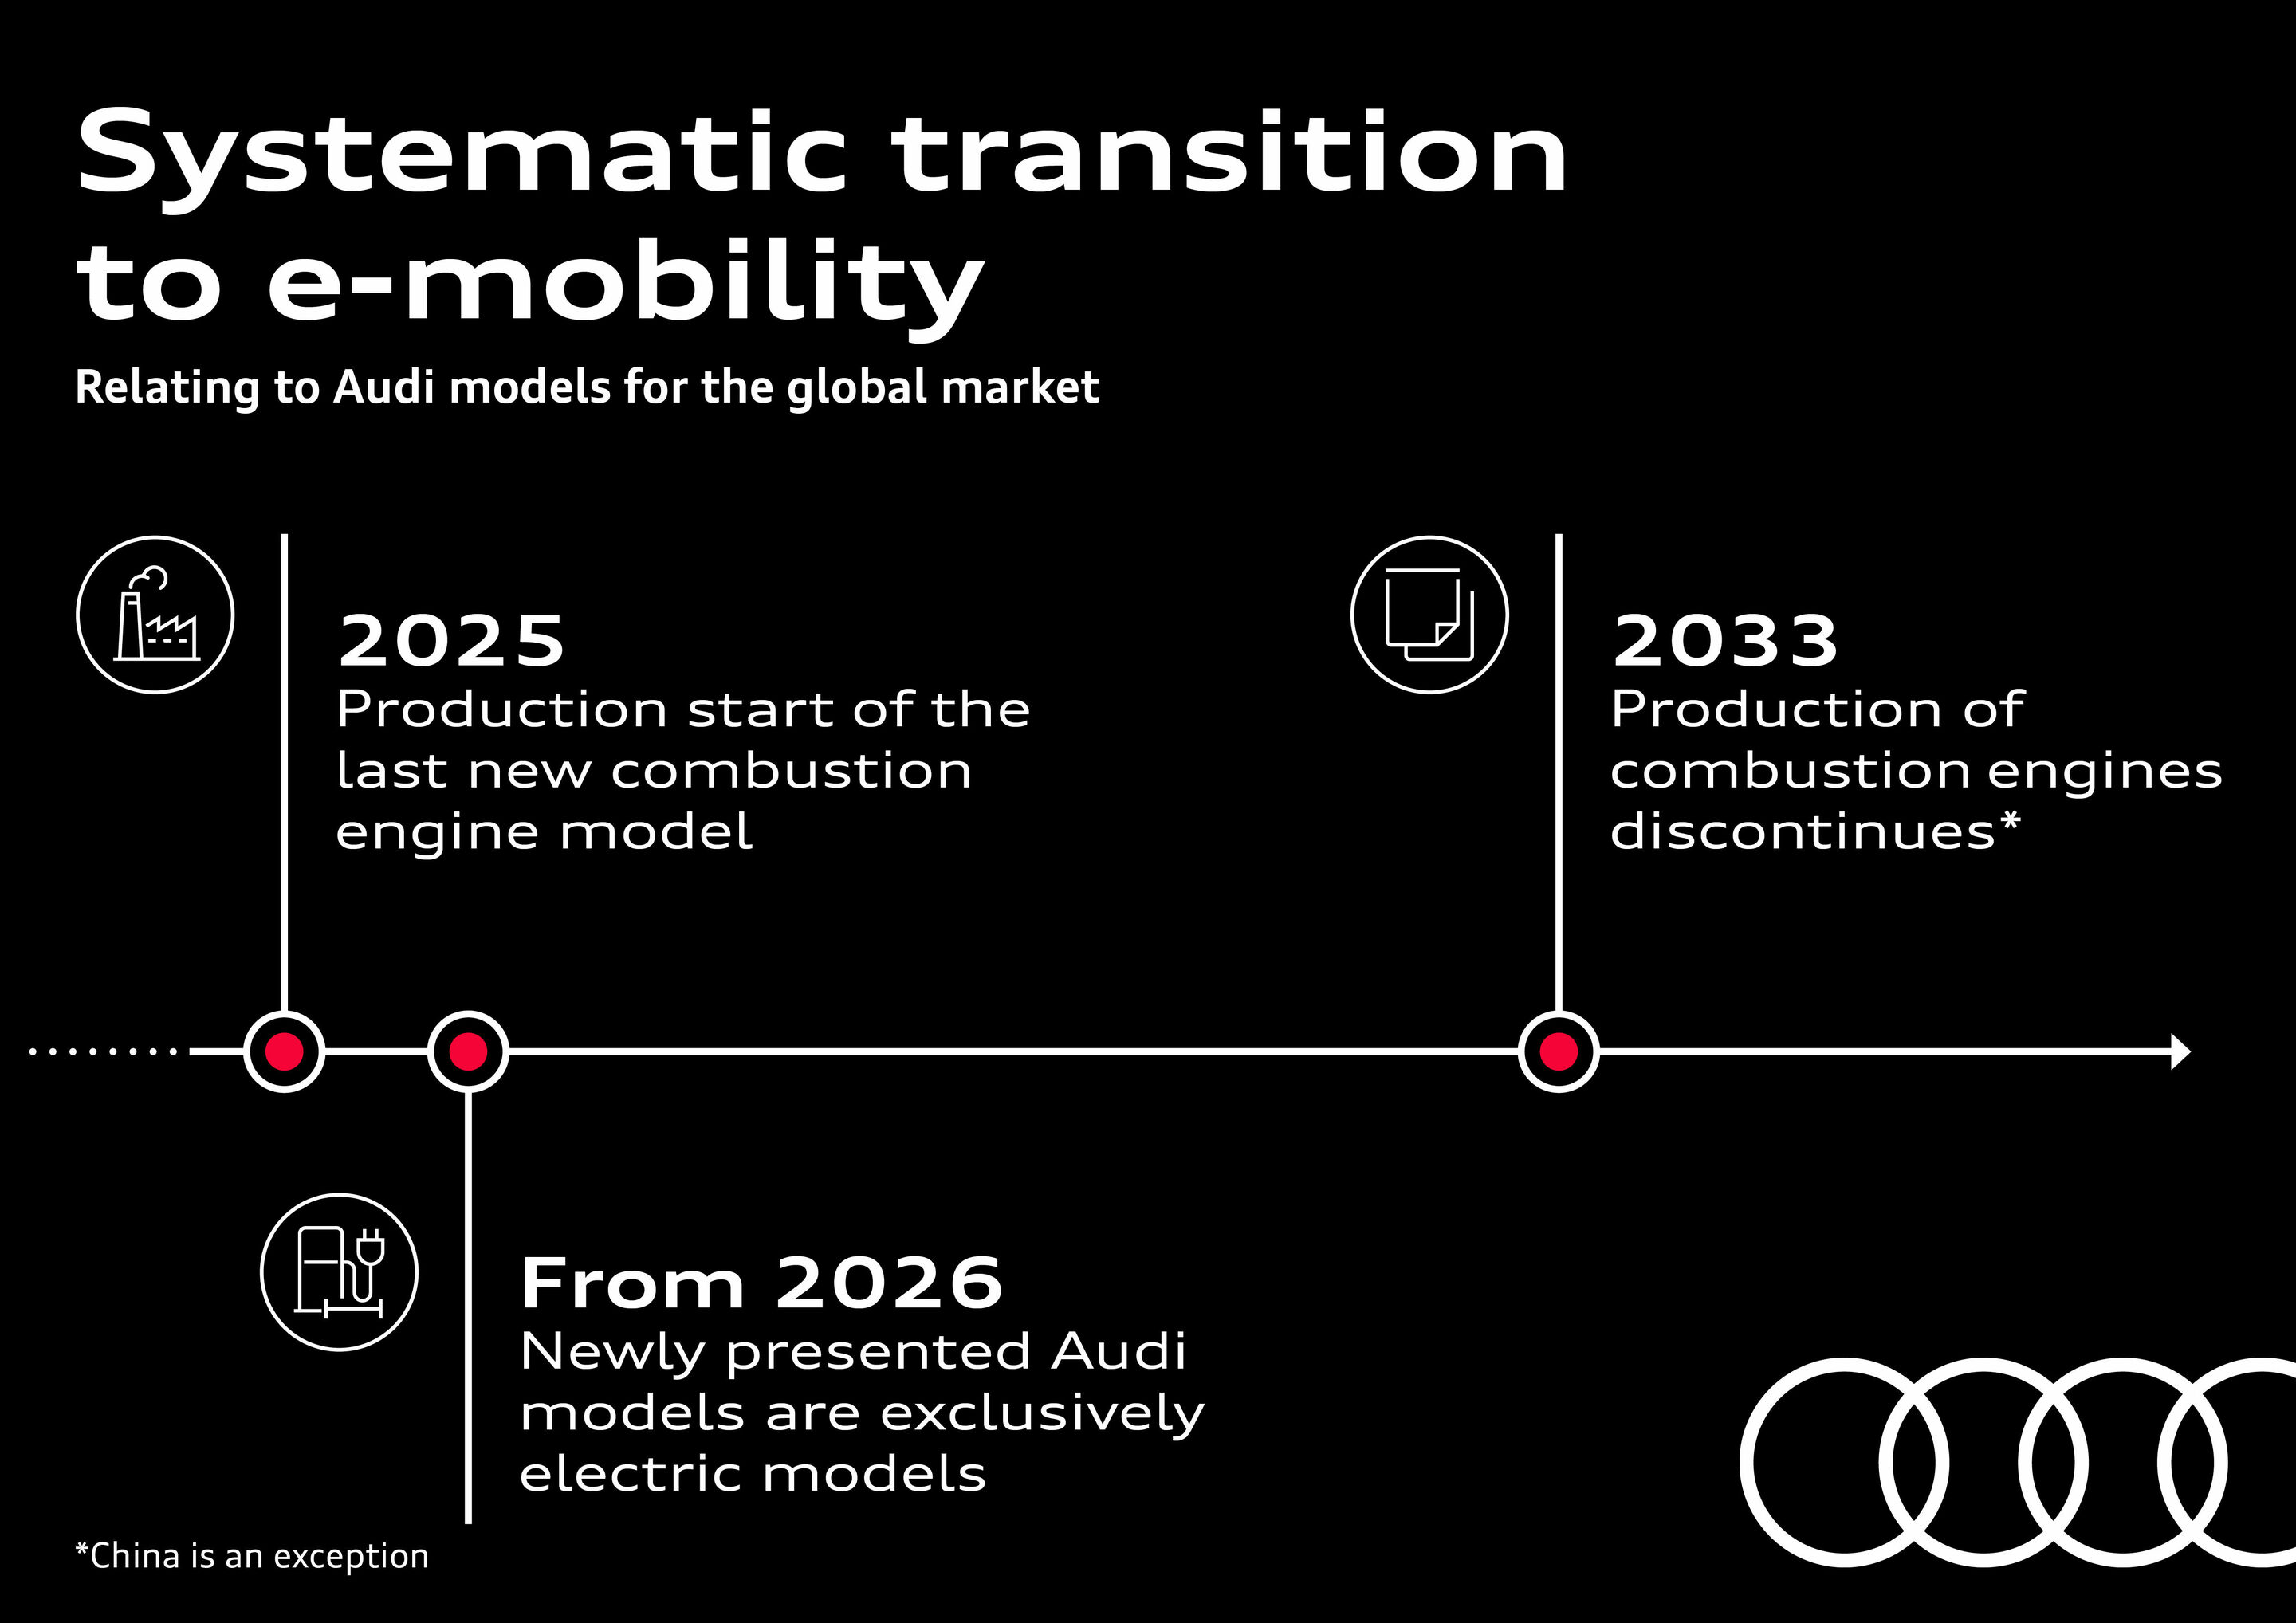 Systematic transition to e-mobility